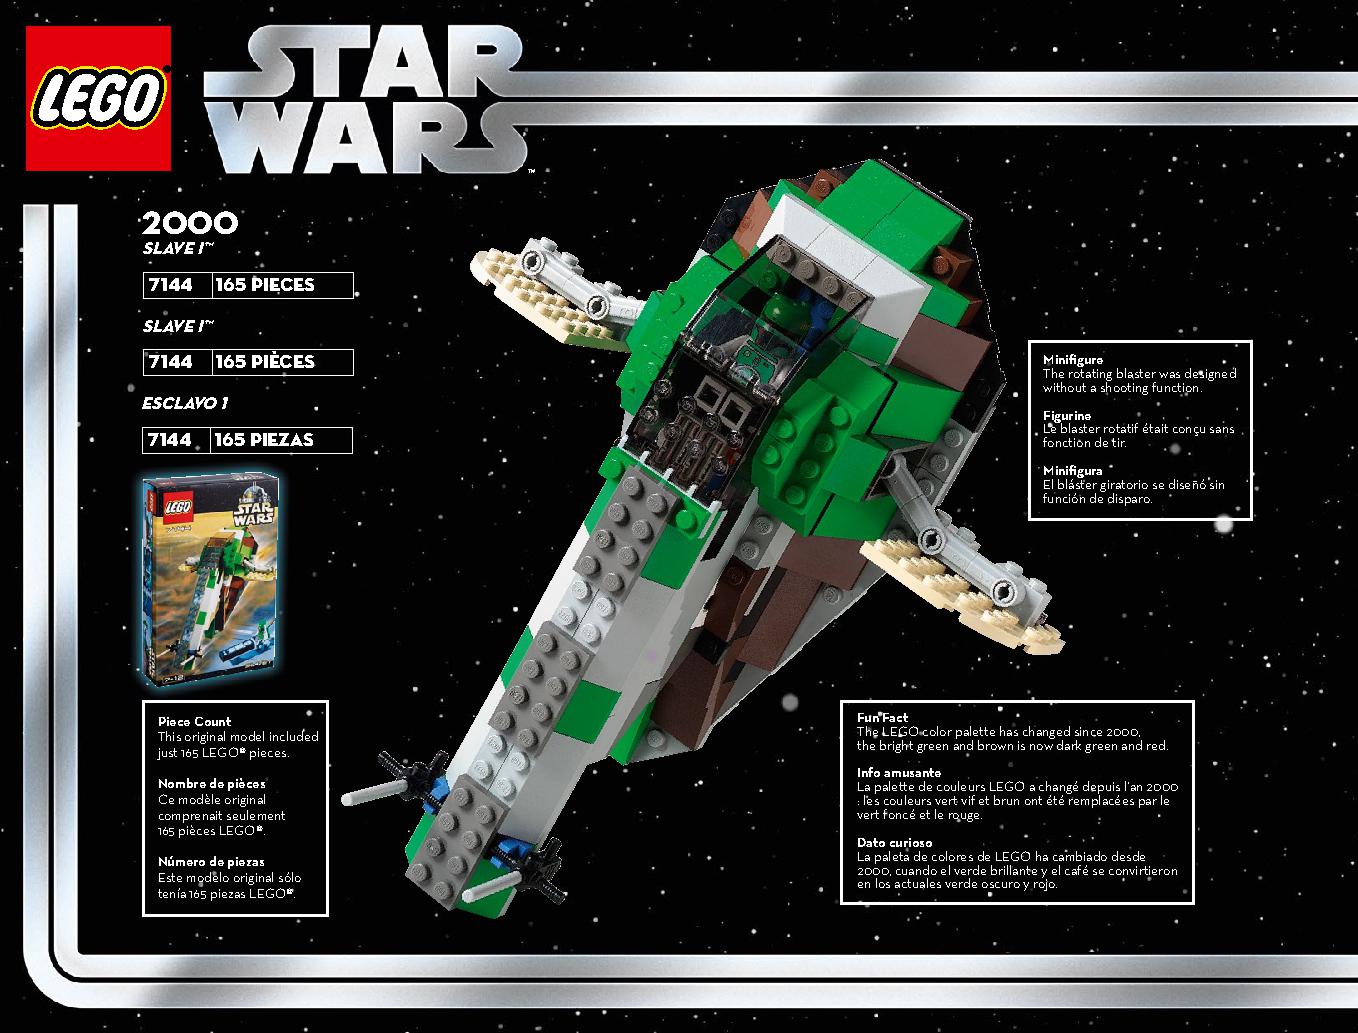 Slave I - 20th Anniversary Edition 75243 LEGO information LEGO instructions 4 page